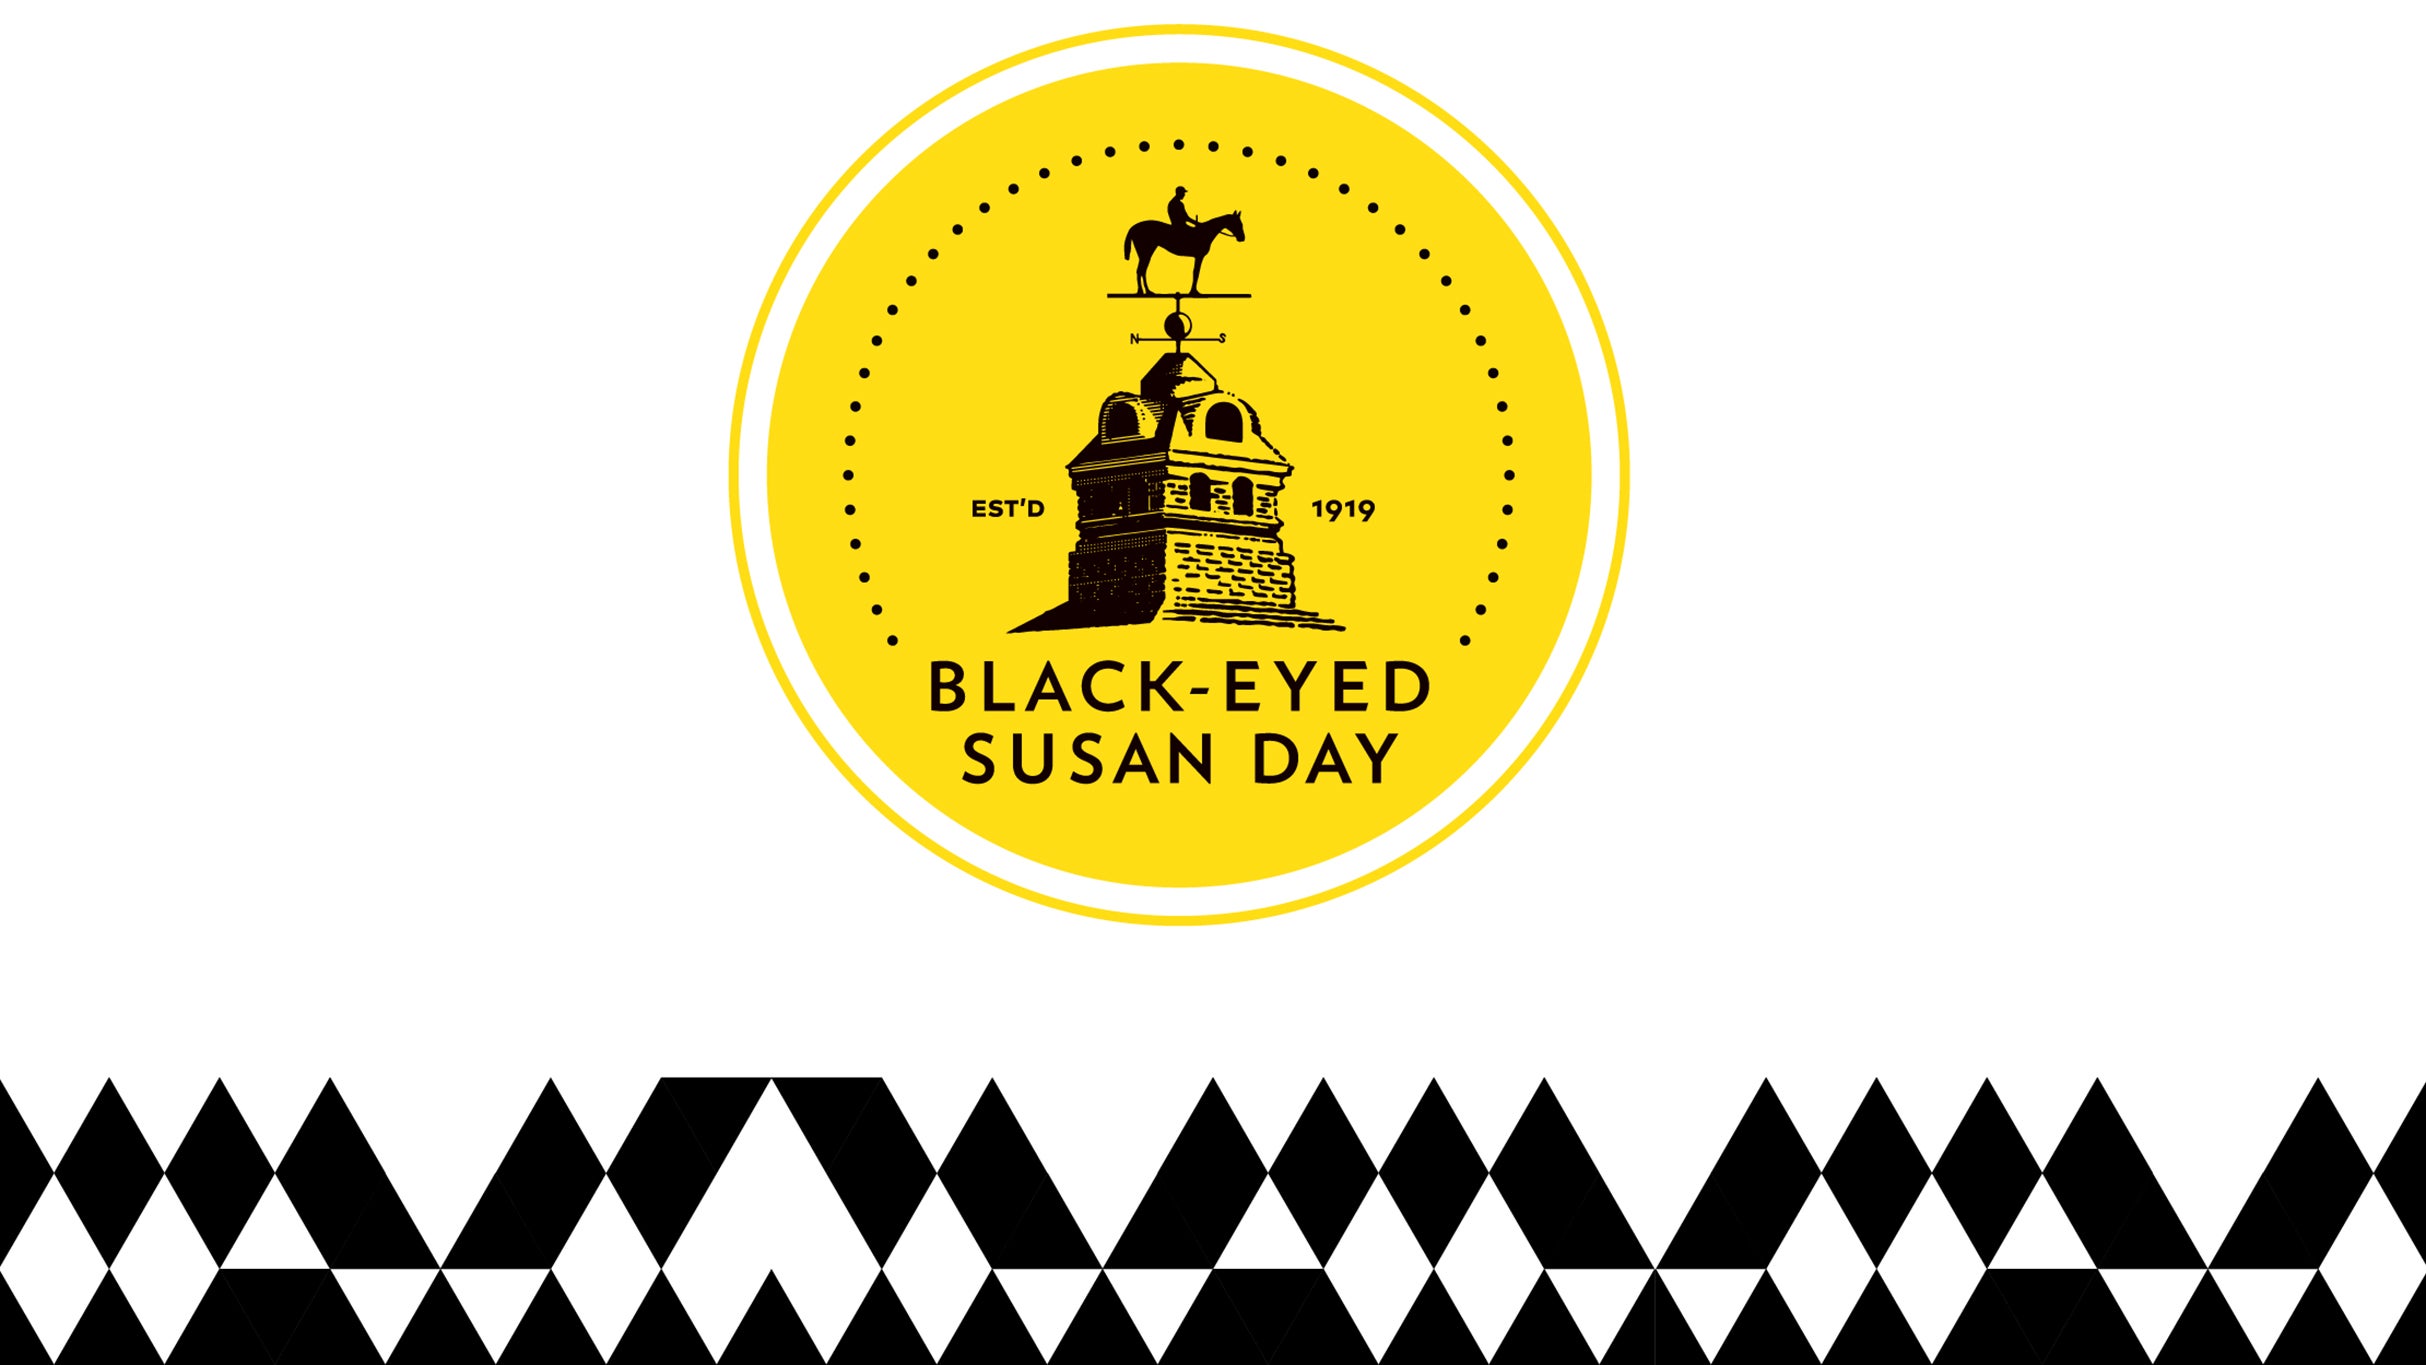 150th Black Eyed Susan Day at Pimlico Race Course